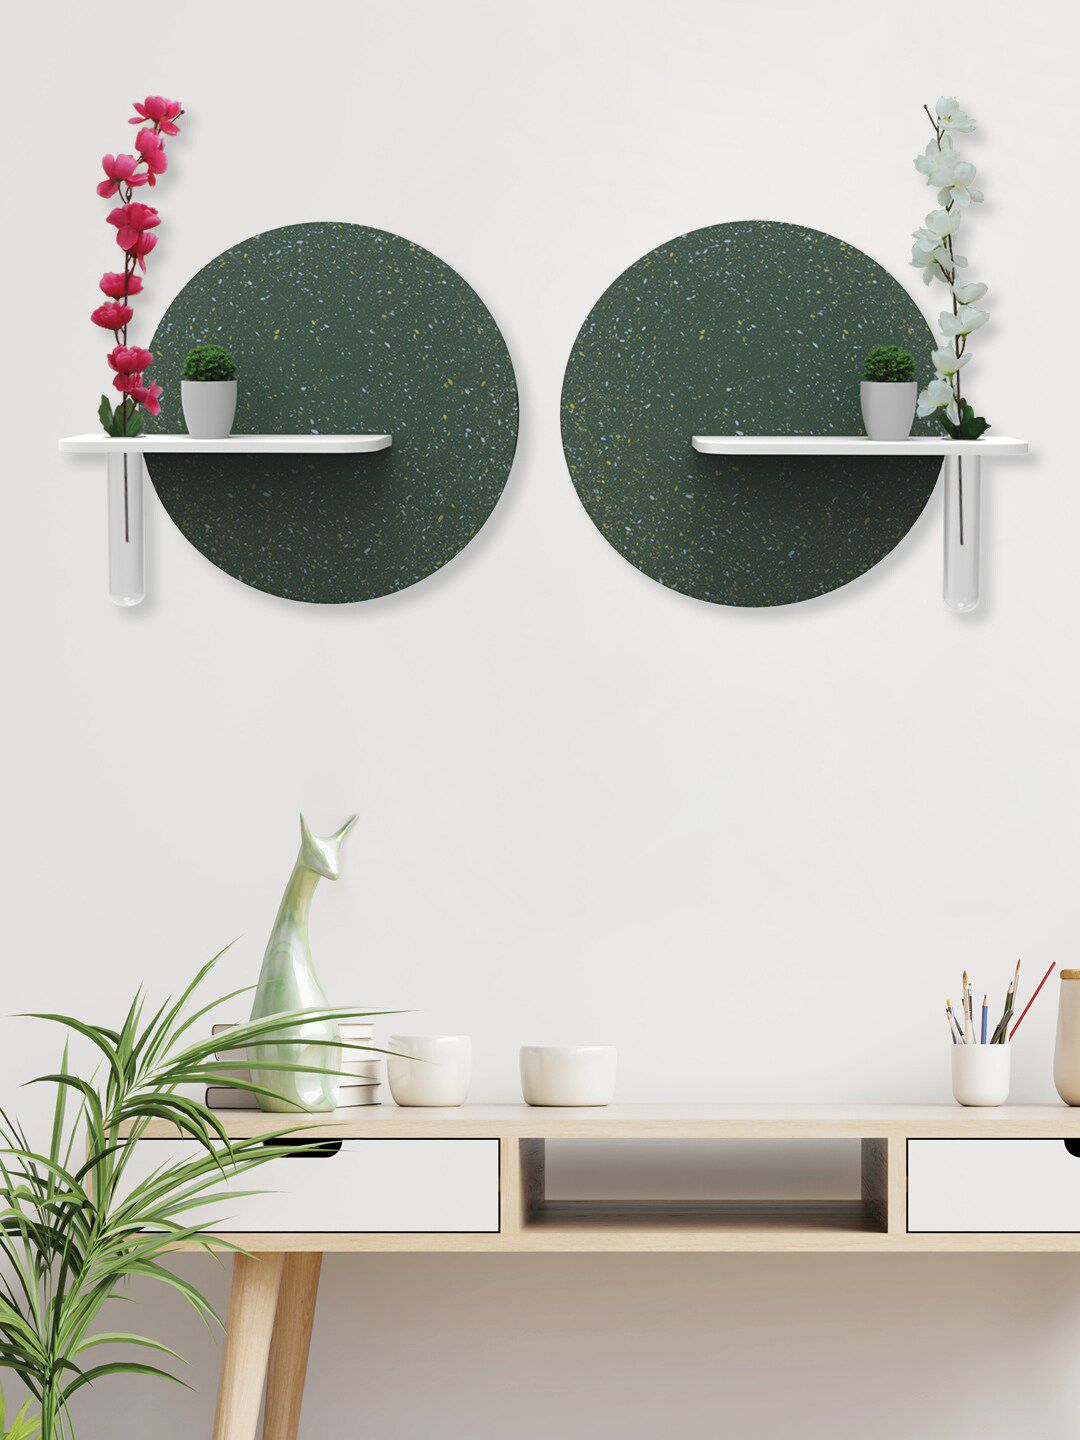 RANDOM Set of 2 Wall Hanging Artificial Flowers & Plants with Cherry Blossom Flowers Price in India